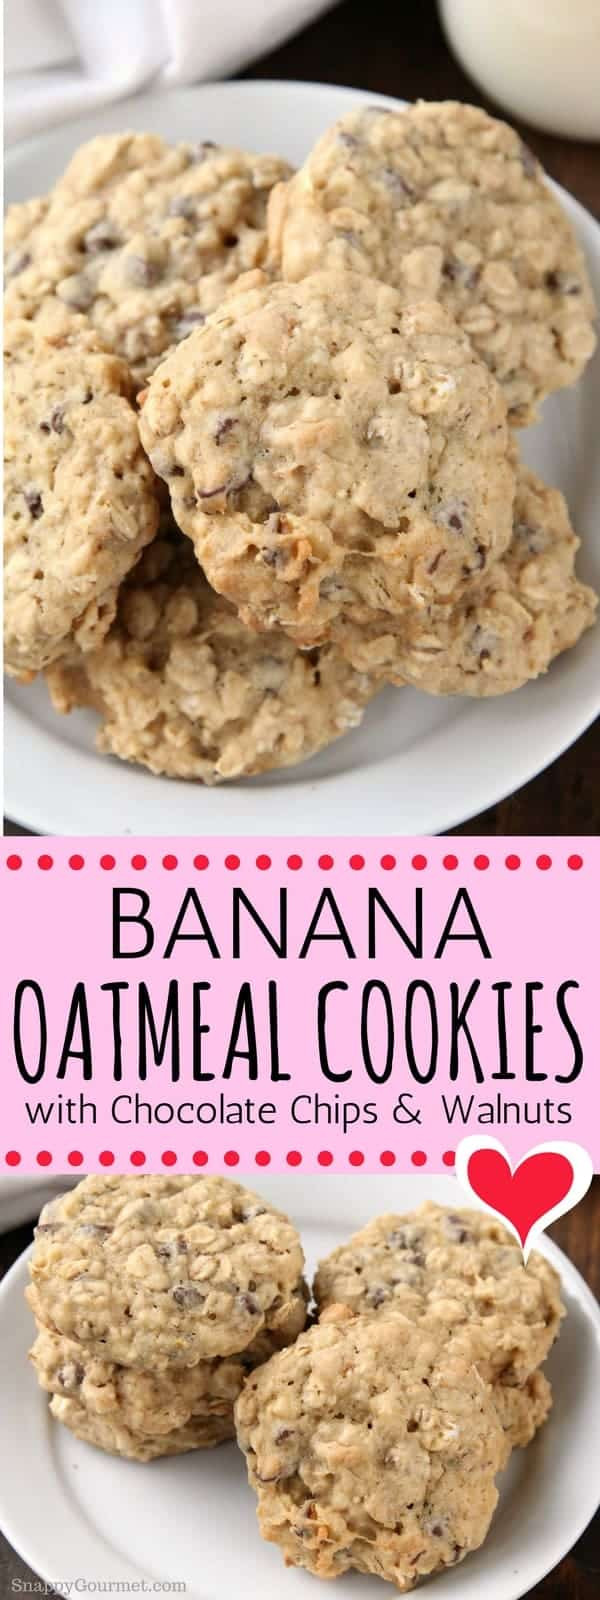 Gourmet Oatmeal Cookies
 Banana Oatmeal Cookies Recipe with Chocolate Chips and